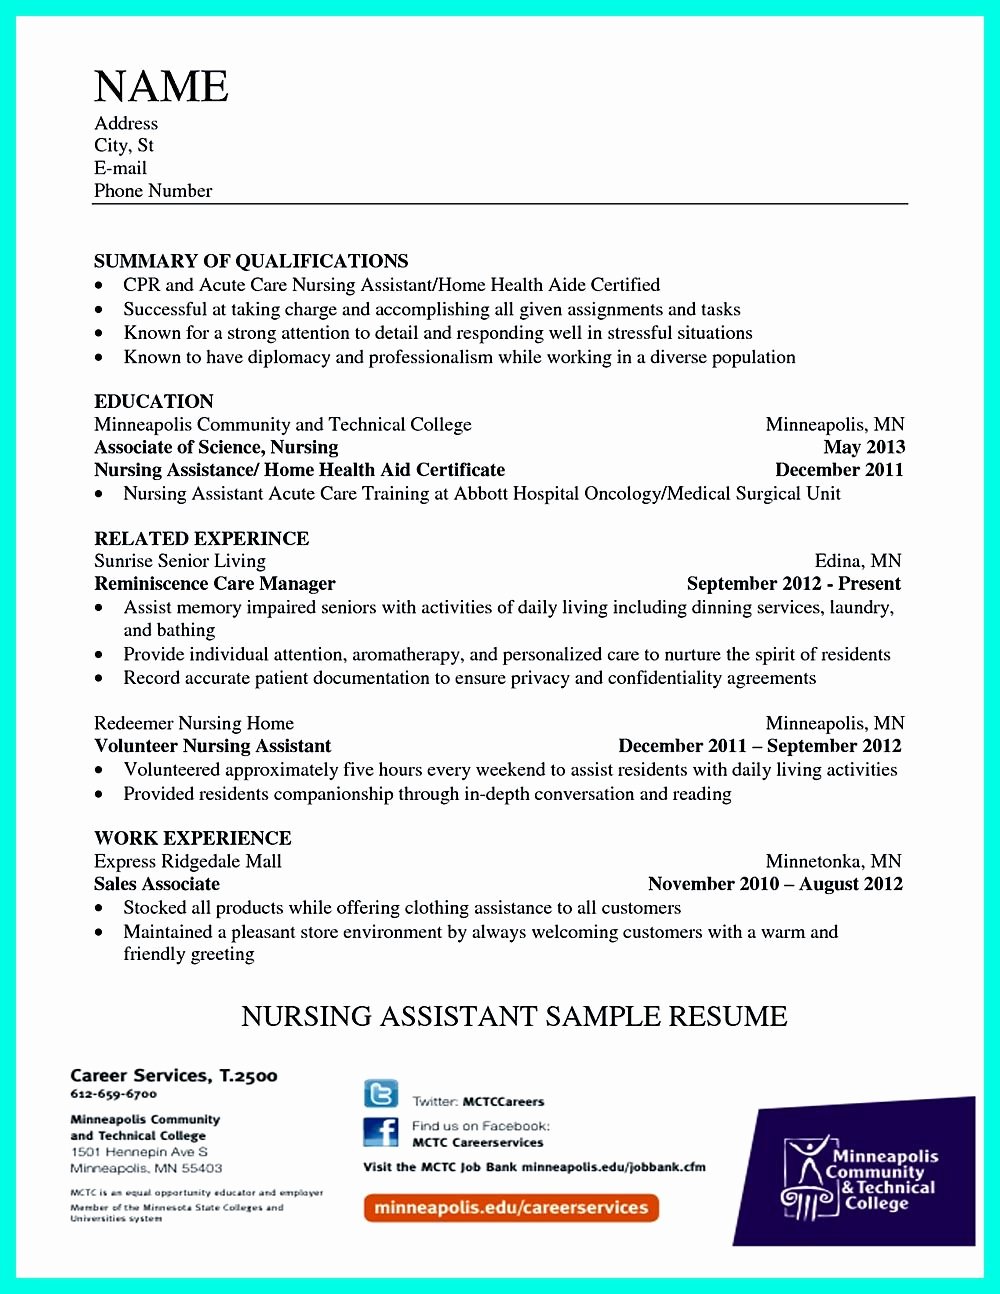 Writing Certified Nursing assistant Resume is Simple if